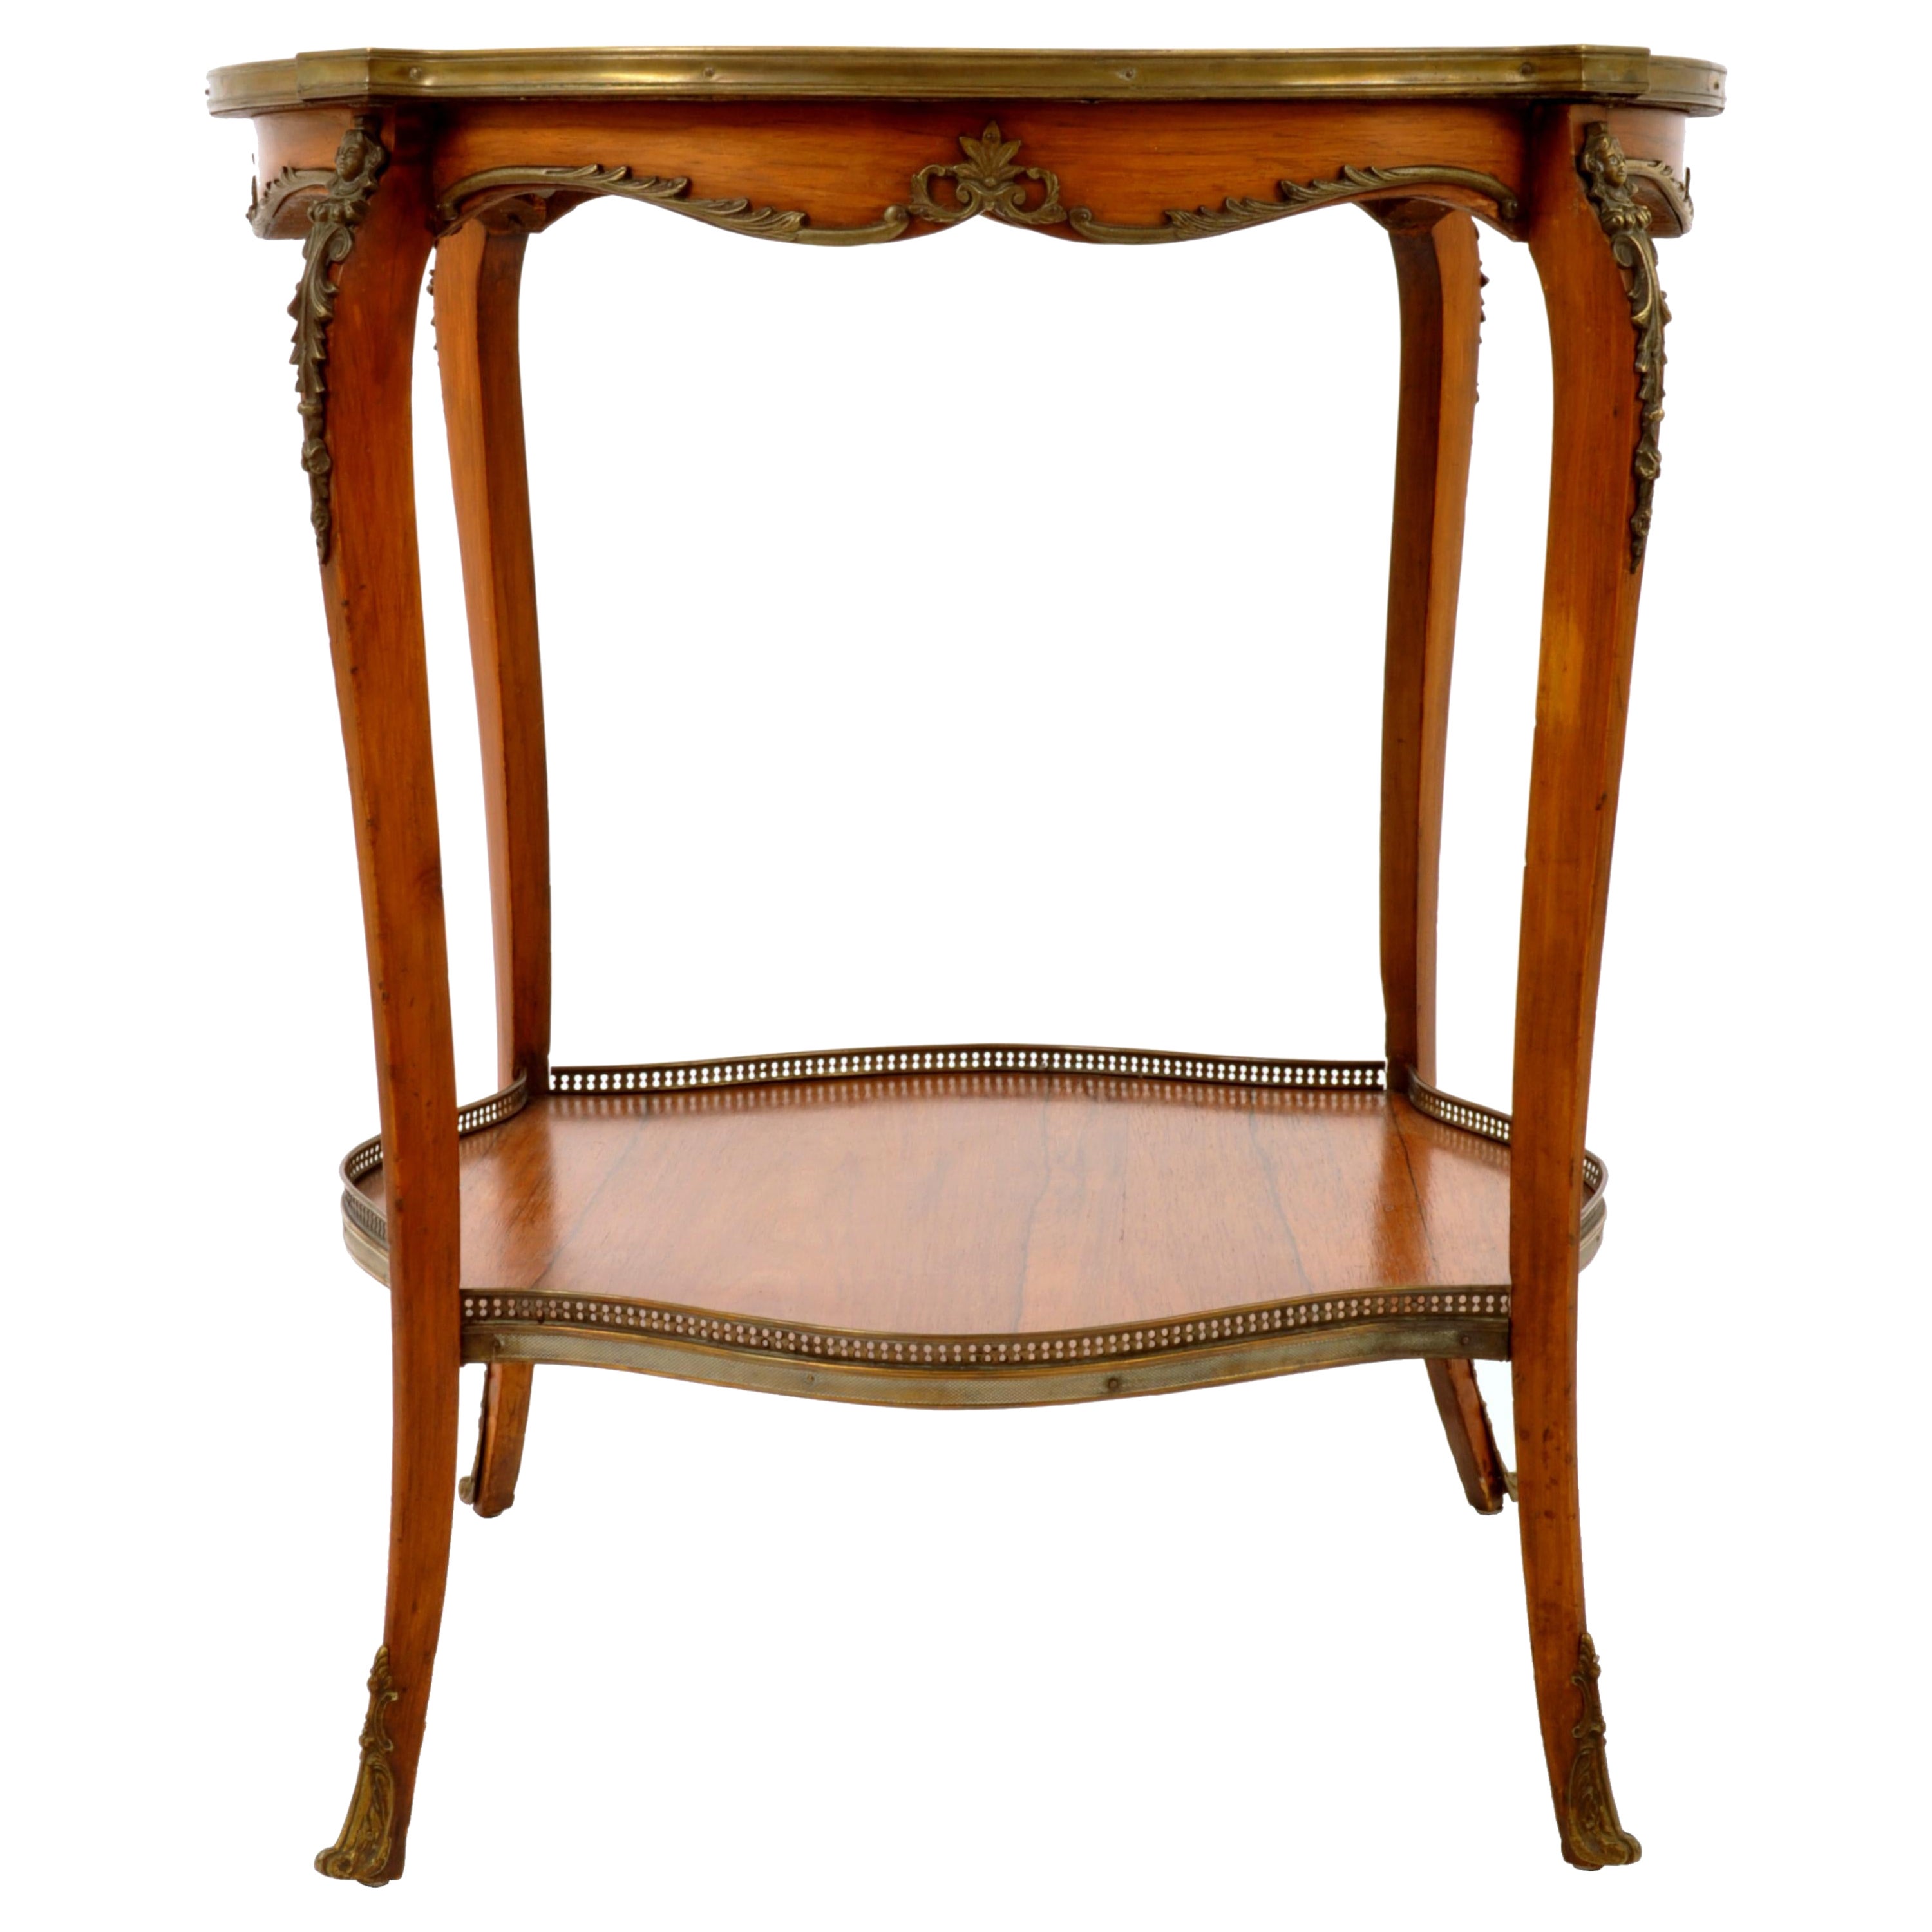 A good 19th century antique French walnut marquetry and ormolu twin tier side/center table, Louis XV style, circa 1880.
The round top having a central floral panel of inlaid fruitwood with a concentric ring of marquetry in a leaf design, the table